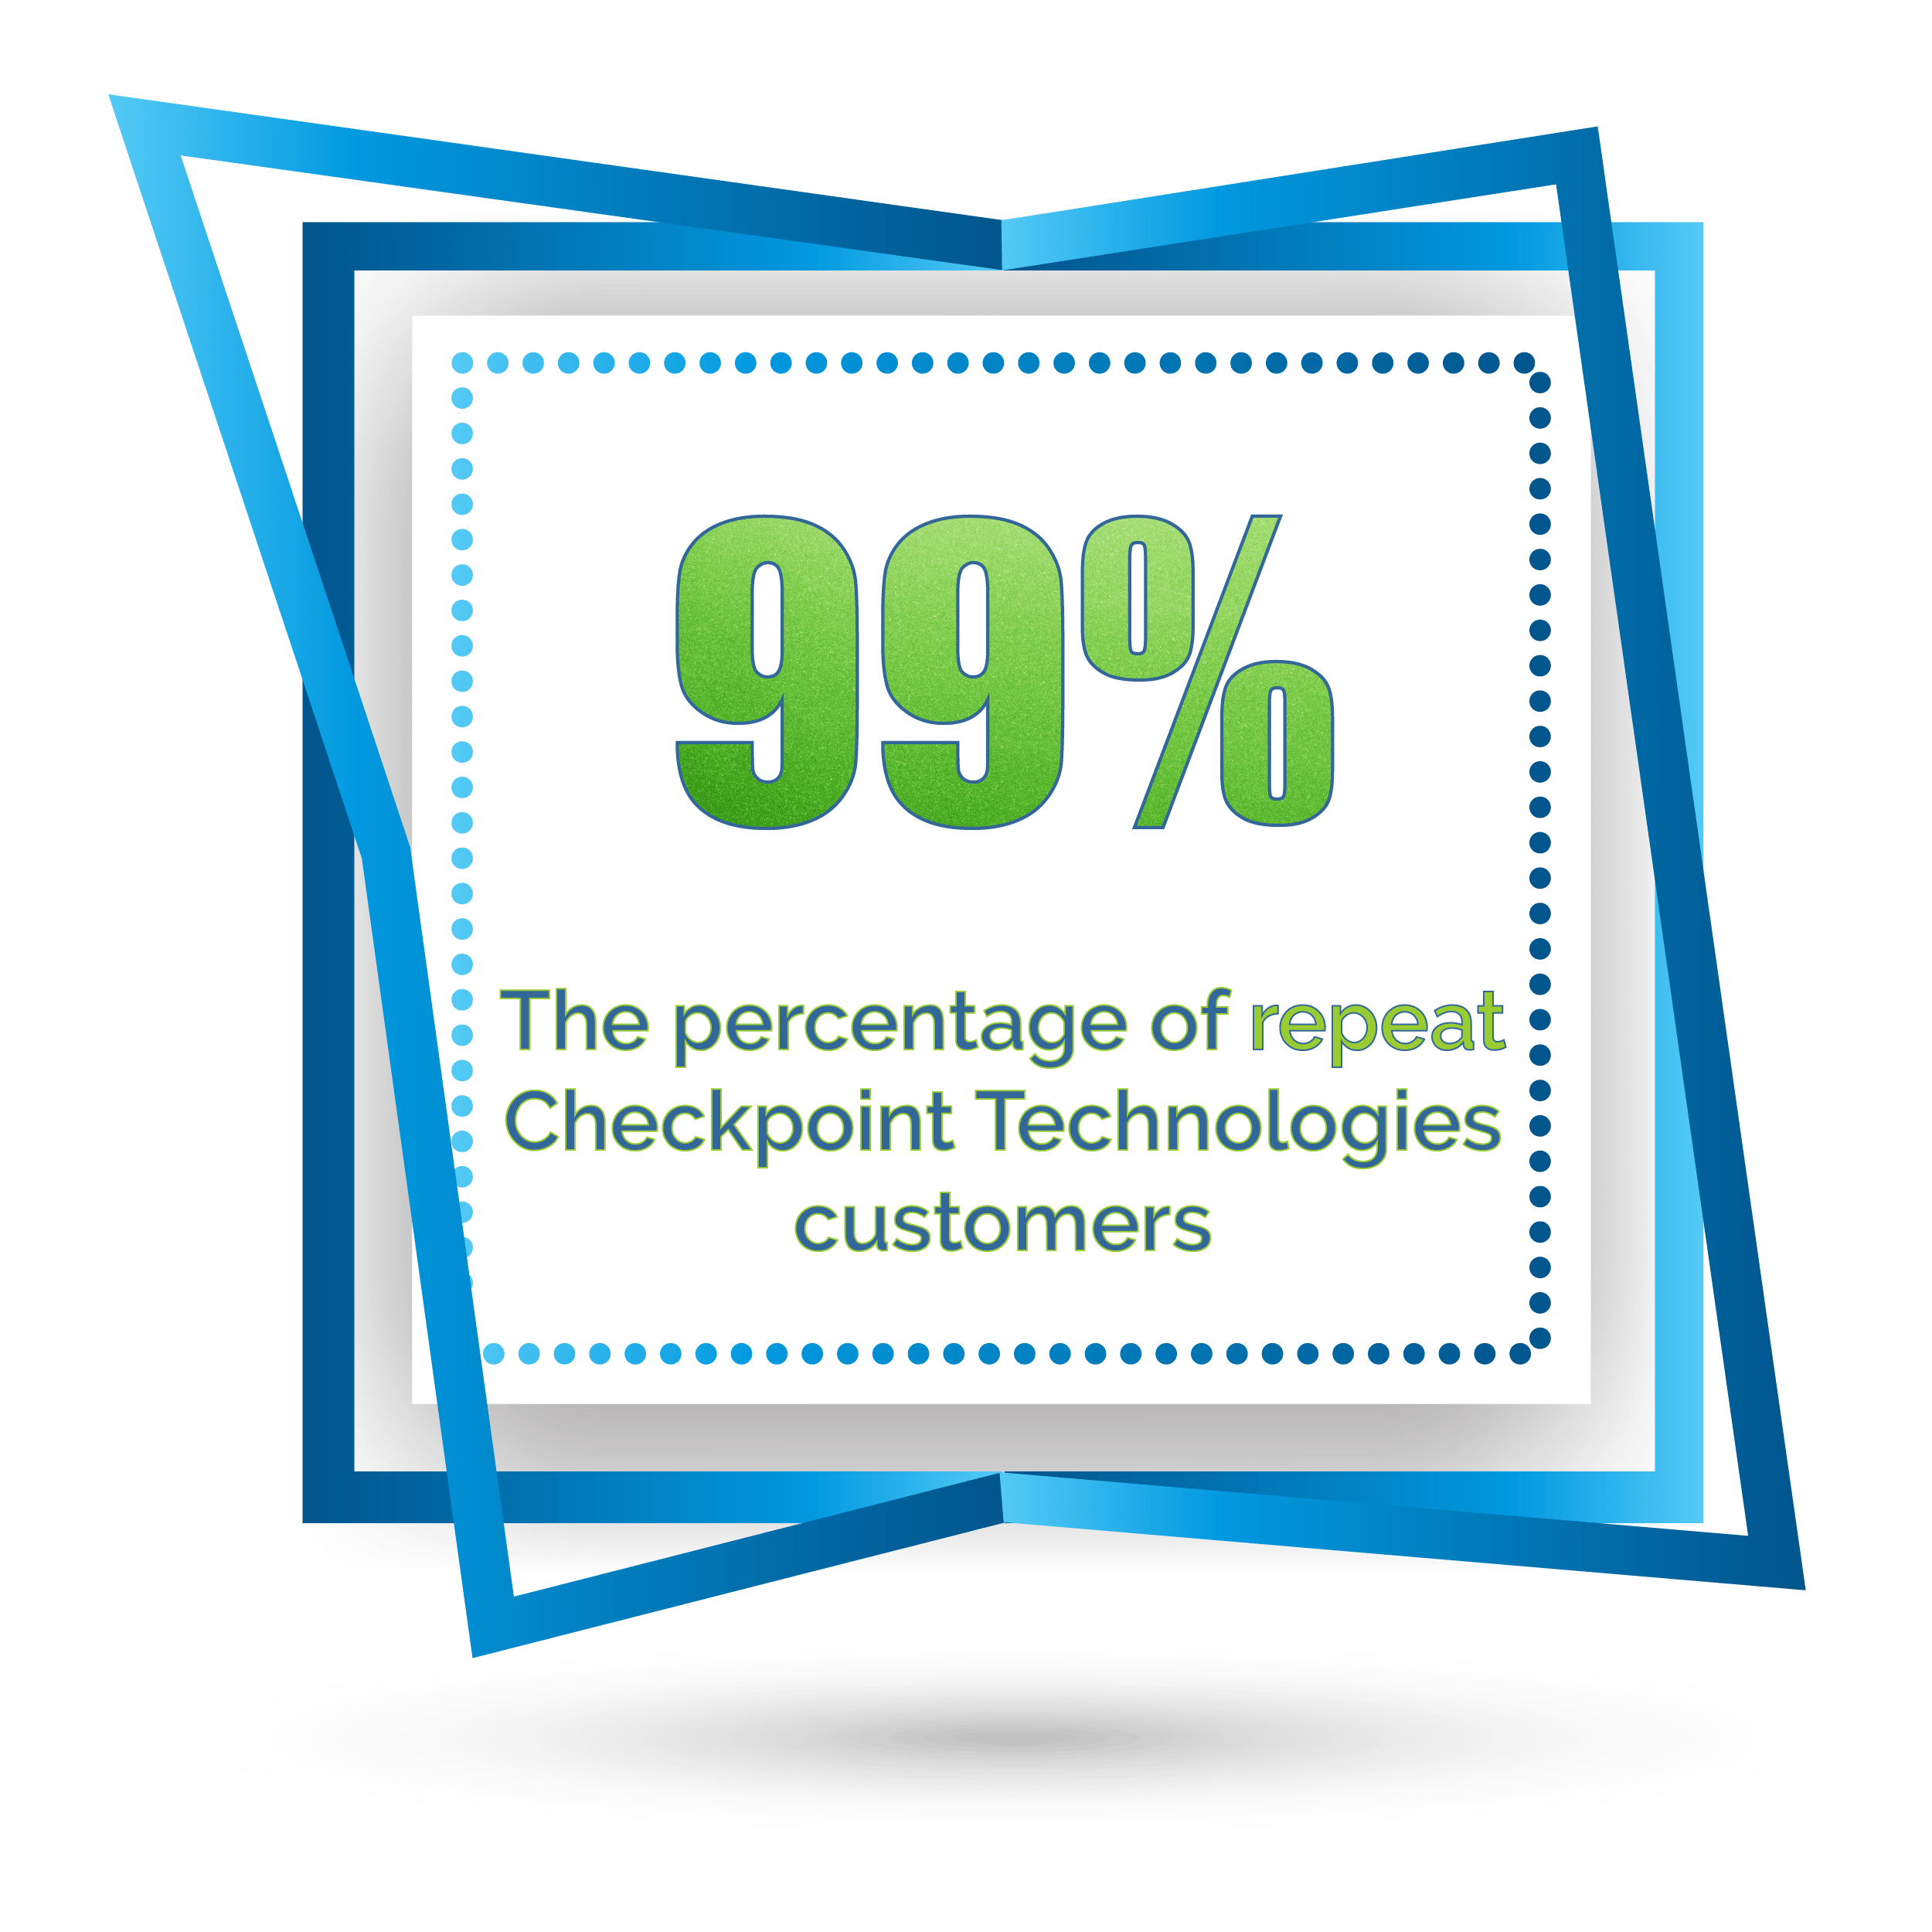 The percentage of repeat Checkpoint Technologies customers